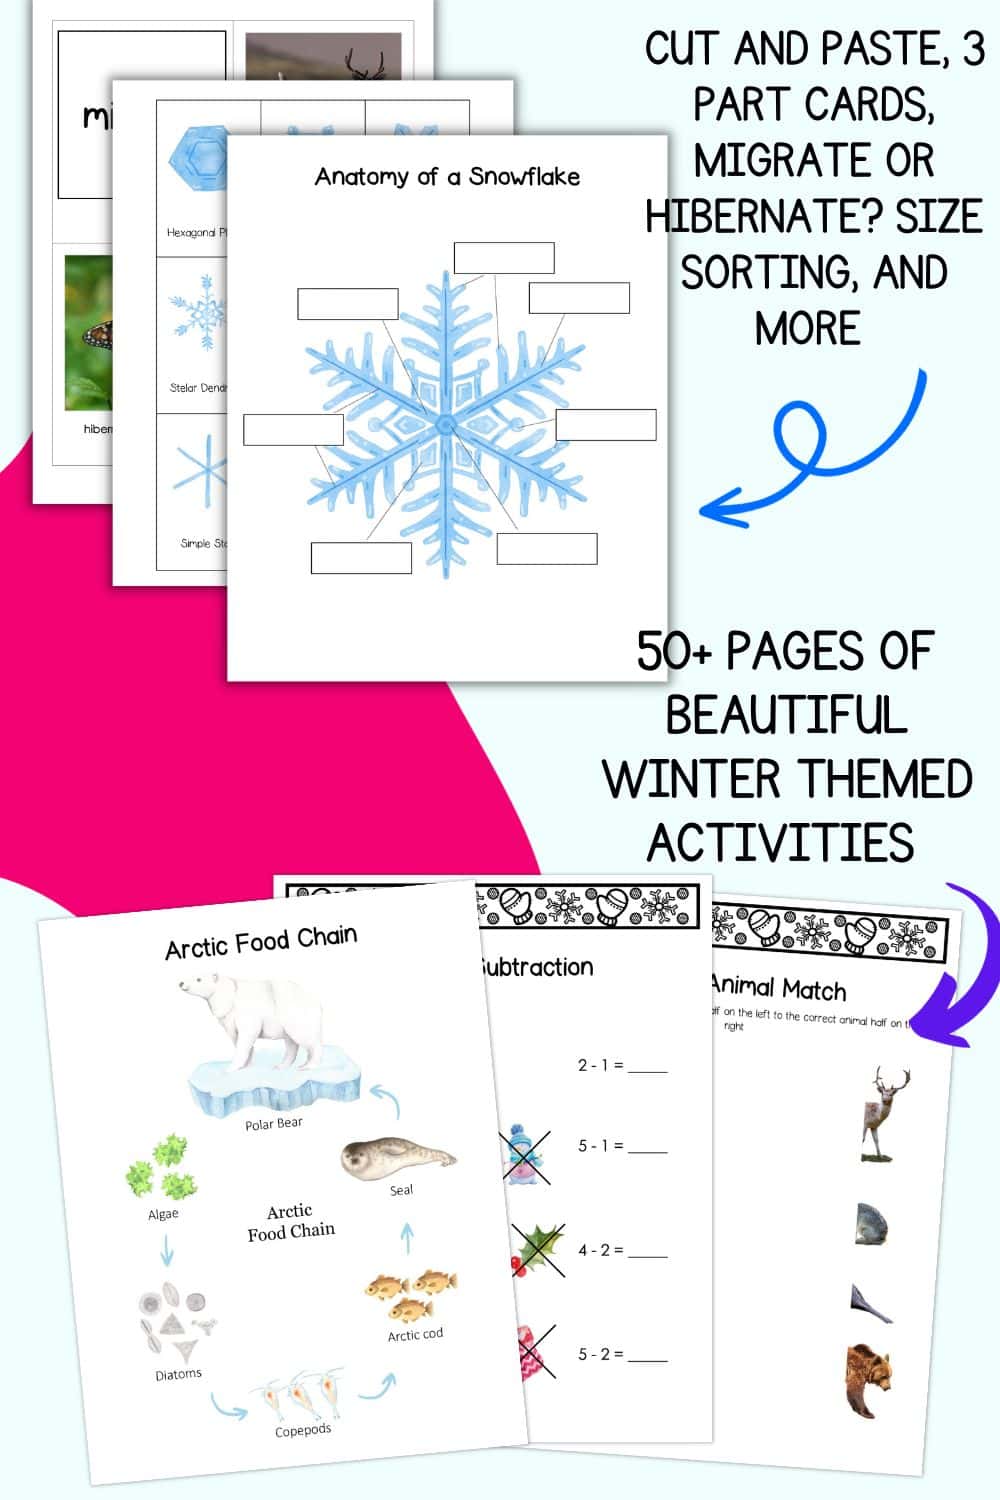 Text "cut and paste, 3 part card, migrate or hibernate? size sorting and more" and "50+ pages of beautiful winter themed activities" with a preview of six pages of Montessori-inspired winter activity pages